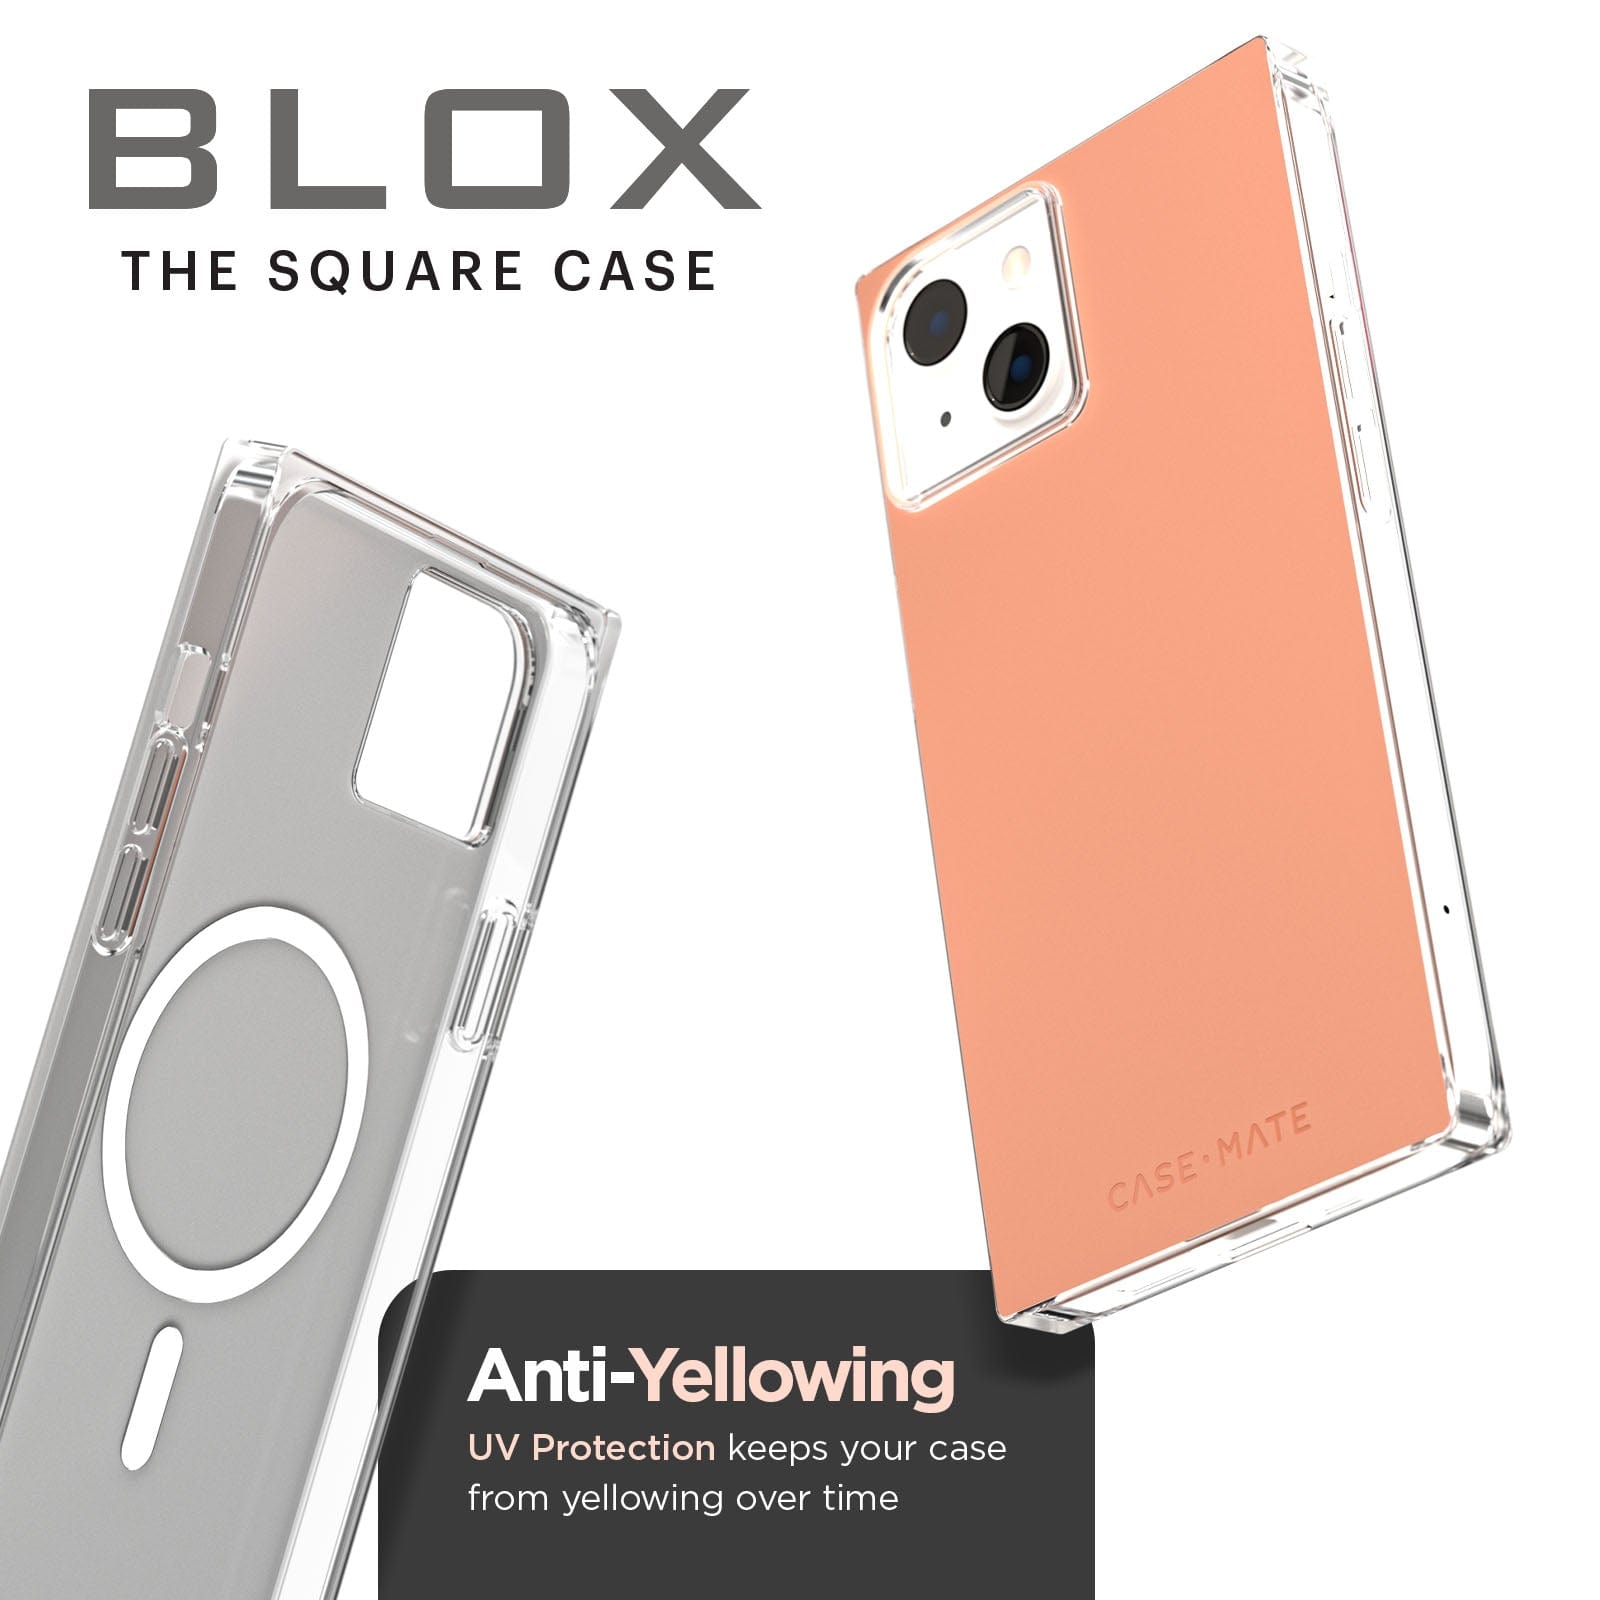 BLOX the Square Case. Anti-yellowing UV protection keeps your case from yellowing over time. color::Clay Pink